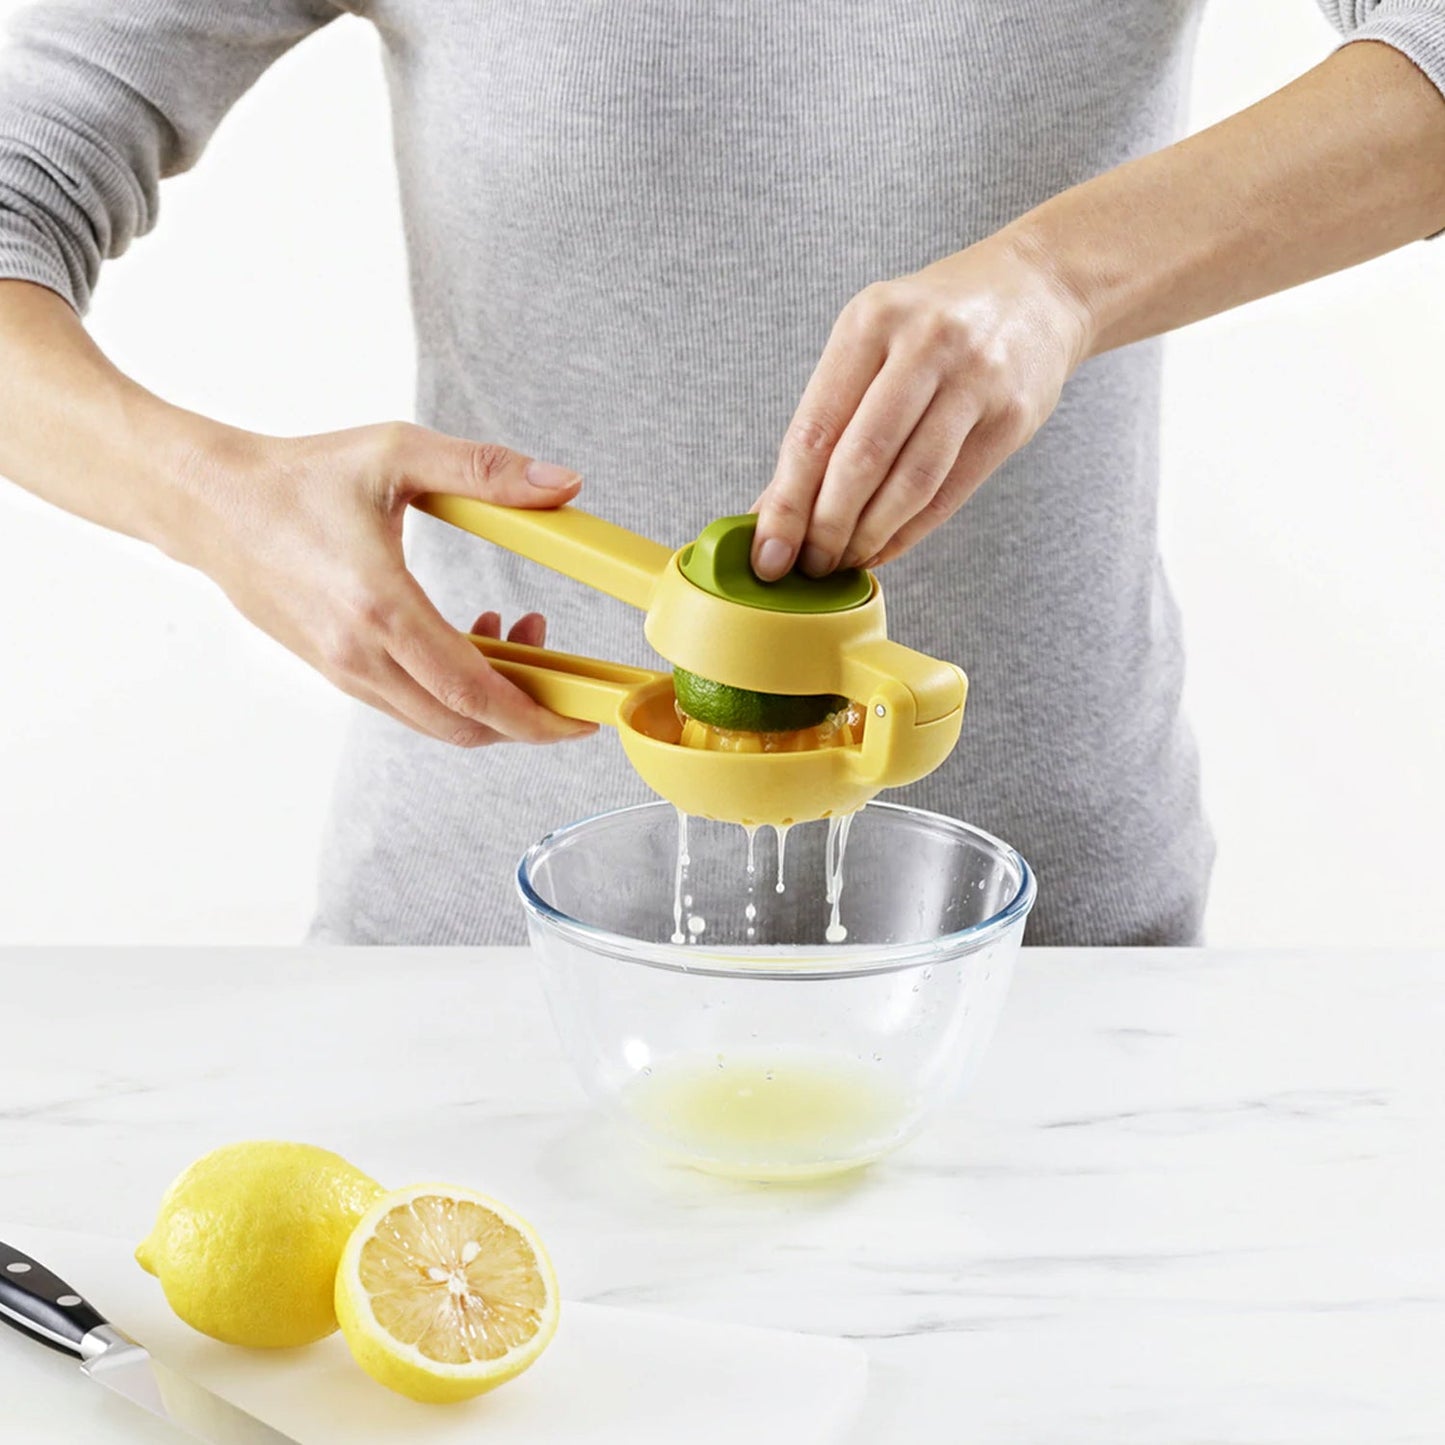 Lemon Squeezer can be taken For Squeezing Lemons For Types Of Food Stuffs